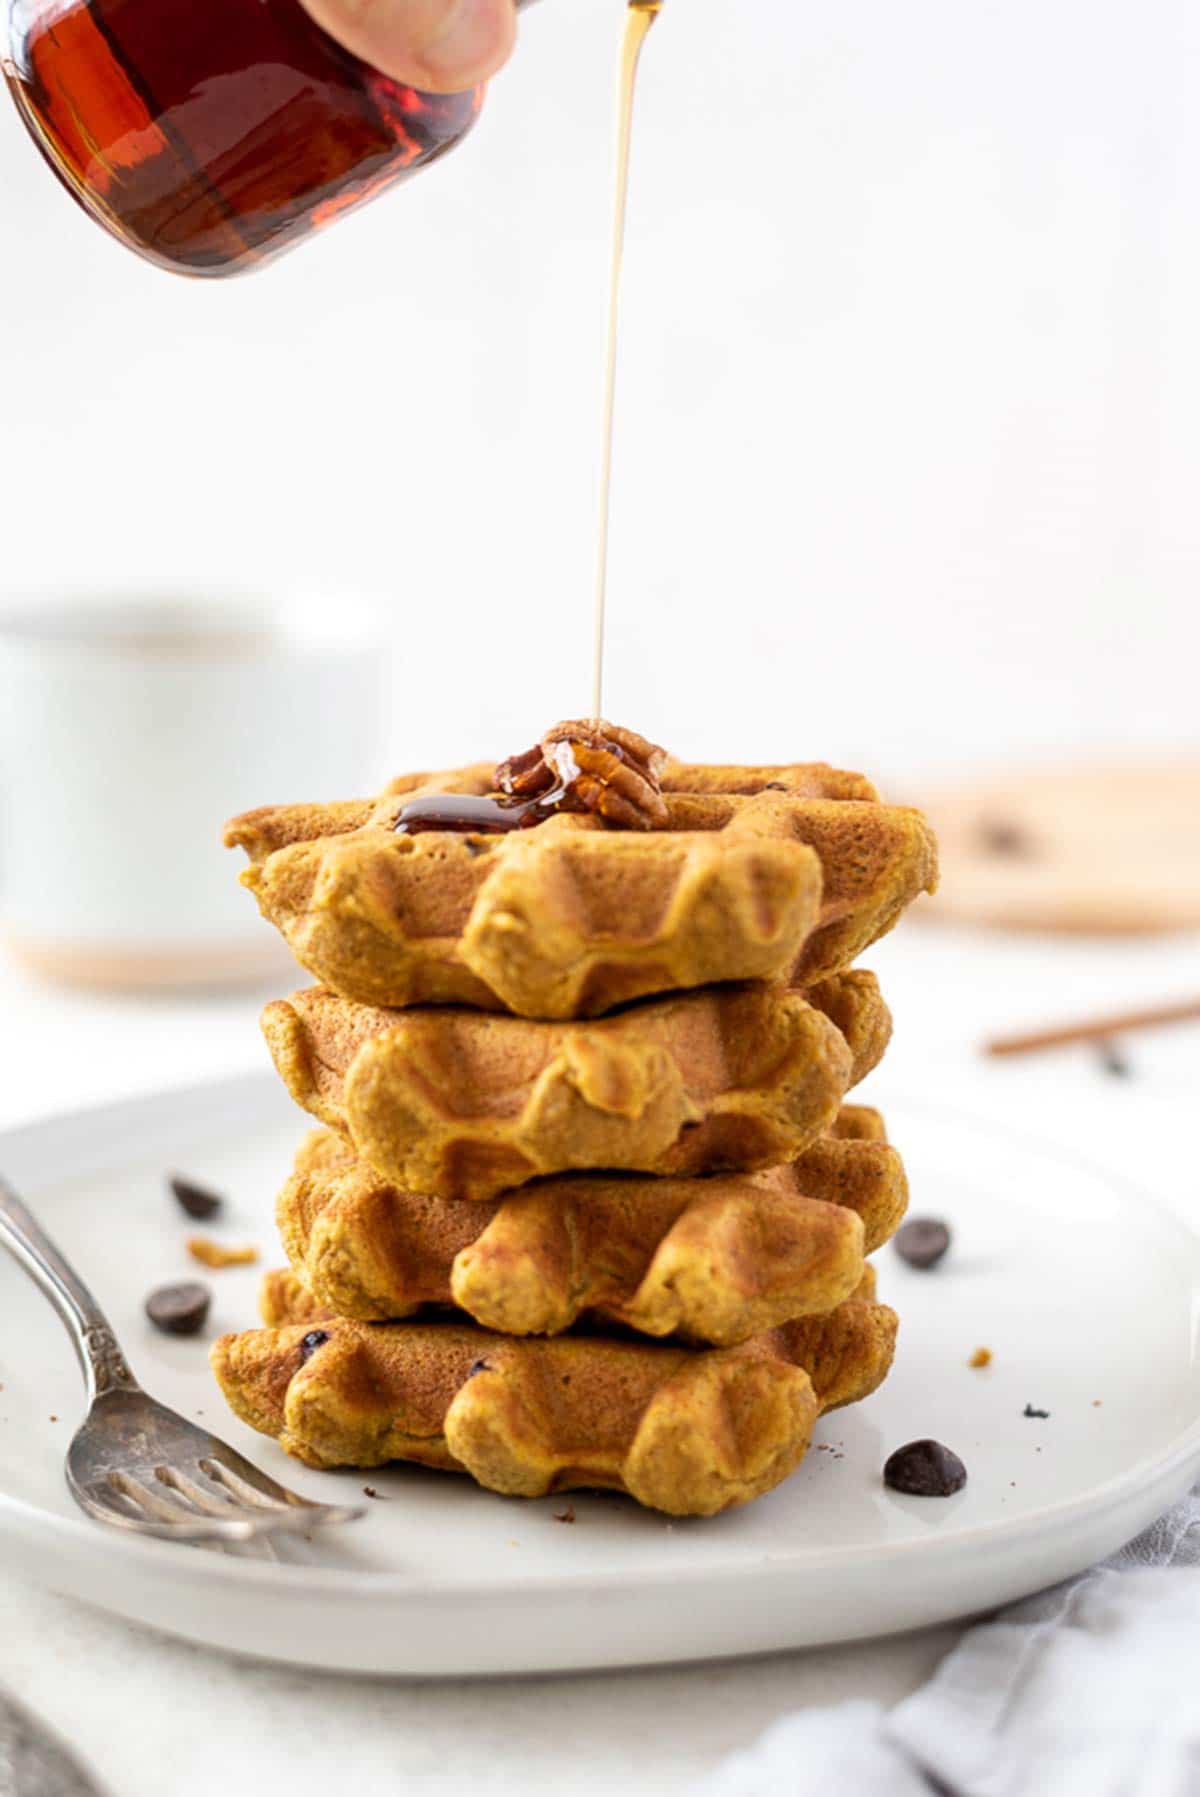 syrup being pour on oat waffles